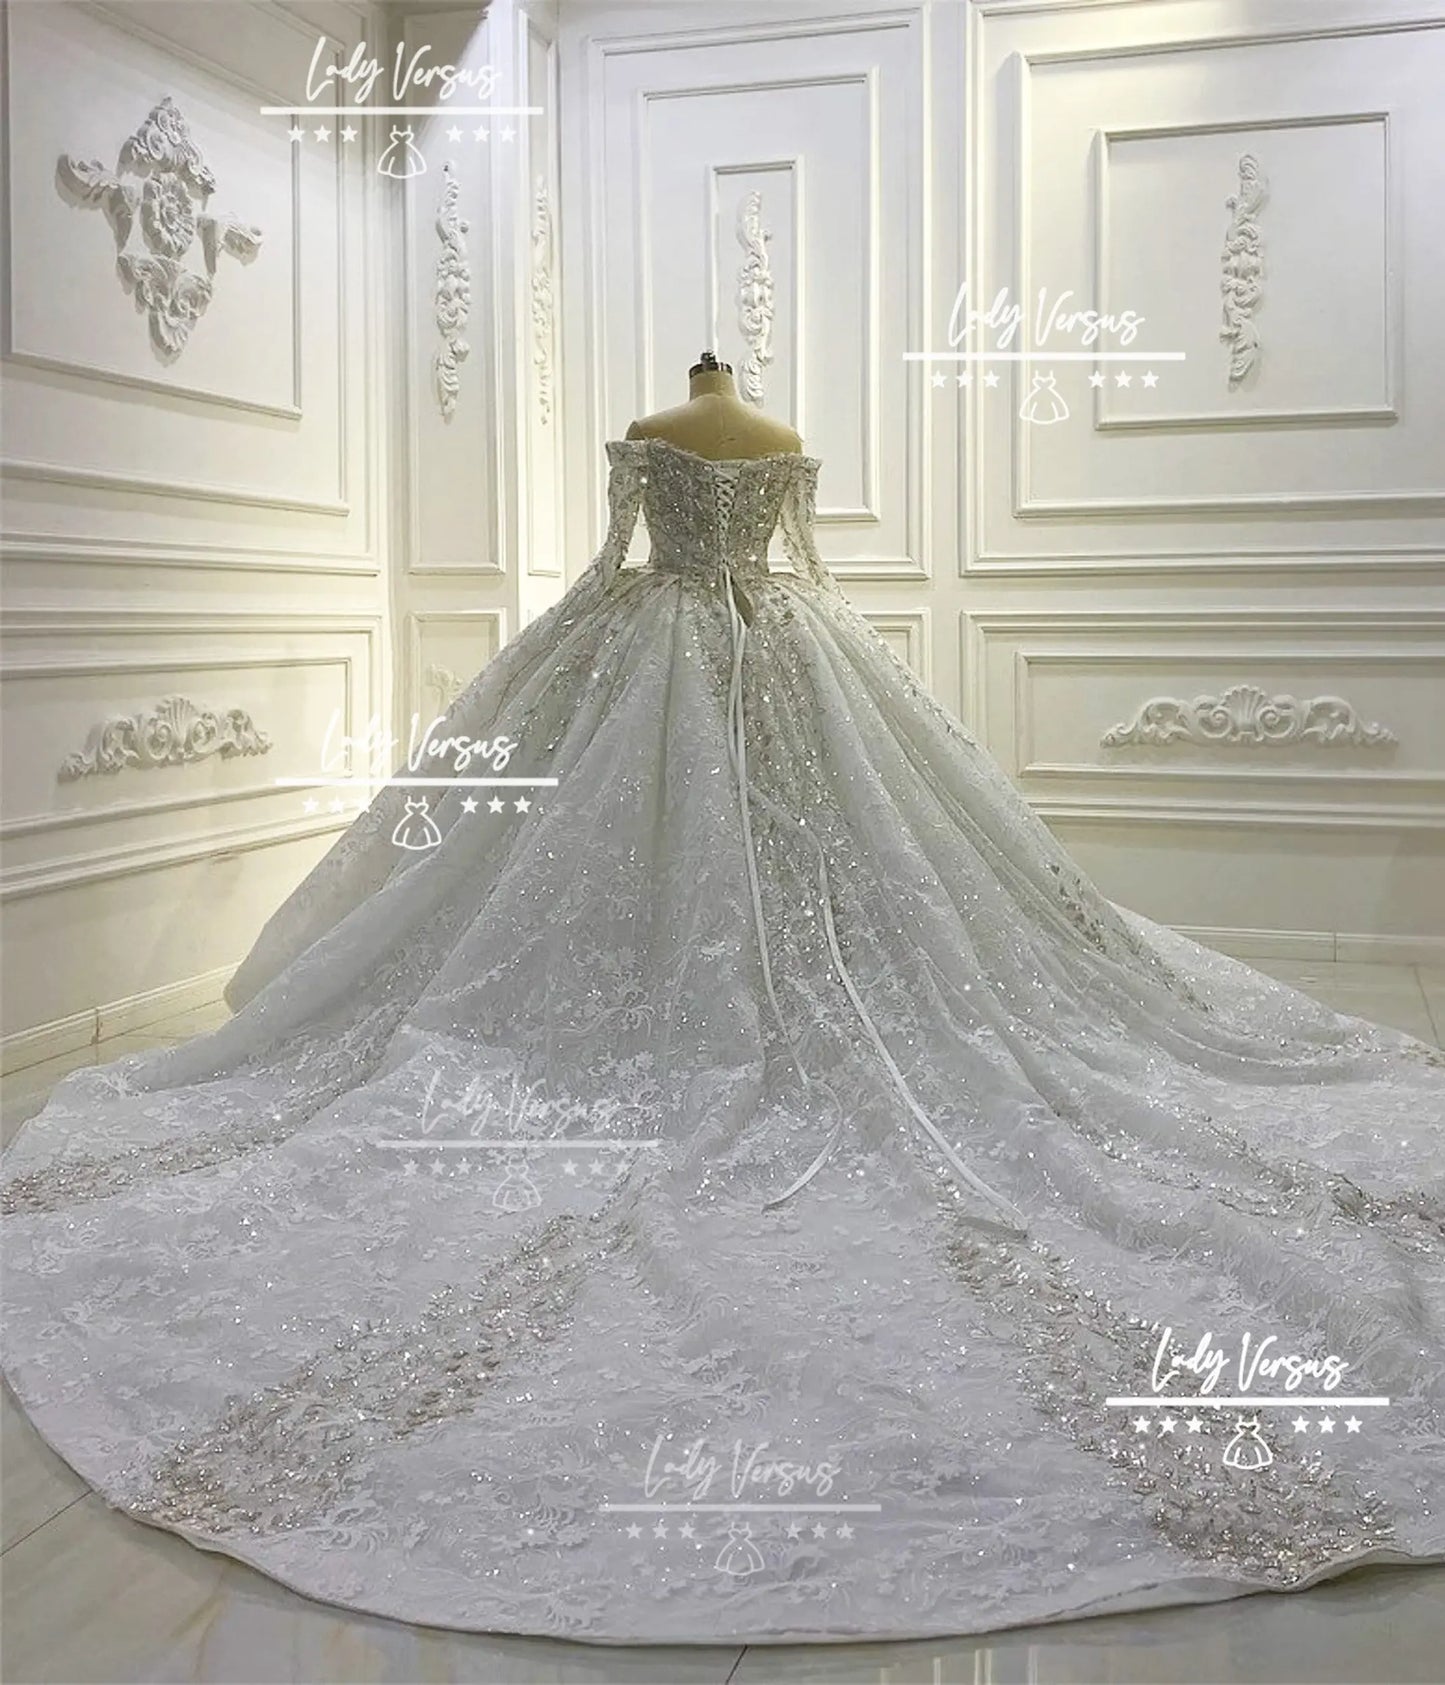 Luxury bridal princess style dress/ Extravagant bridal gown/Gorgeous hand beaded and embellished wedding dress/ Ball Gown/Prom dress Lady Versus